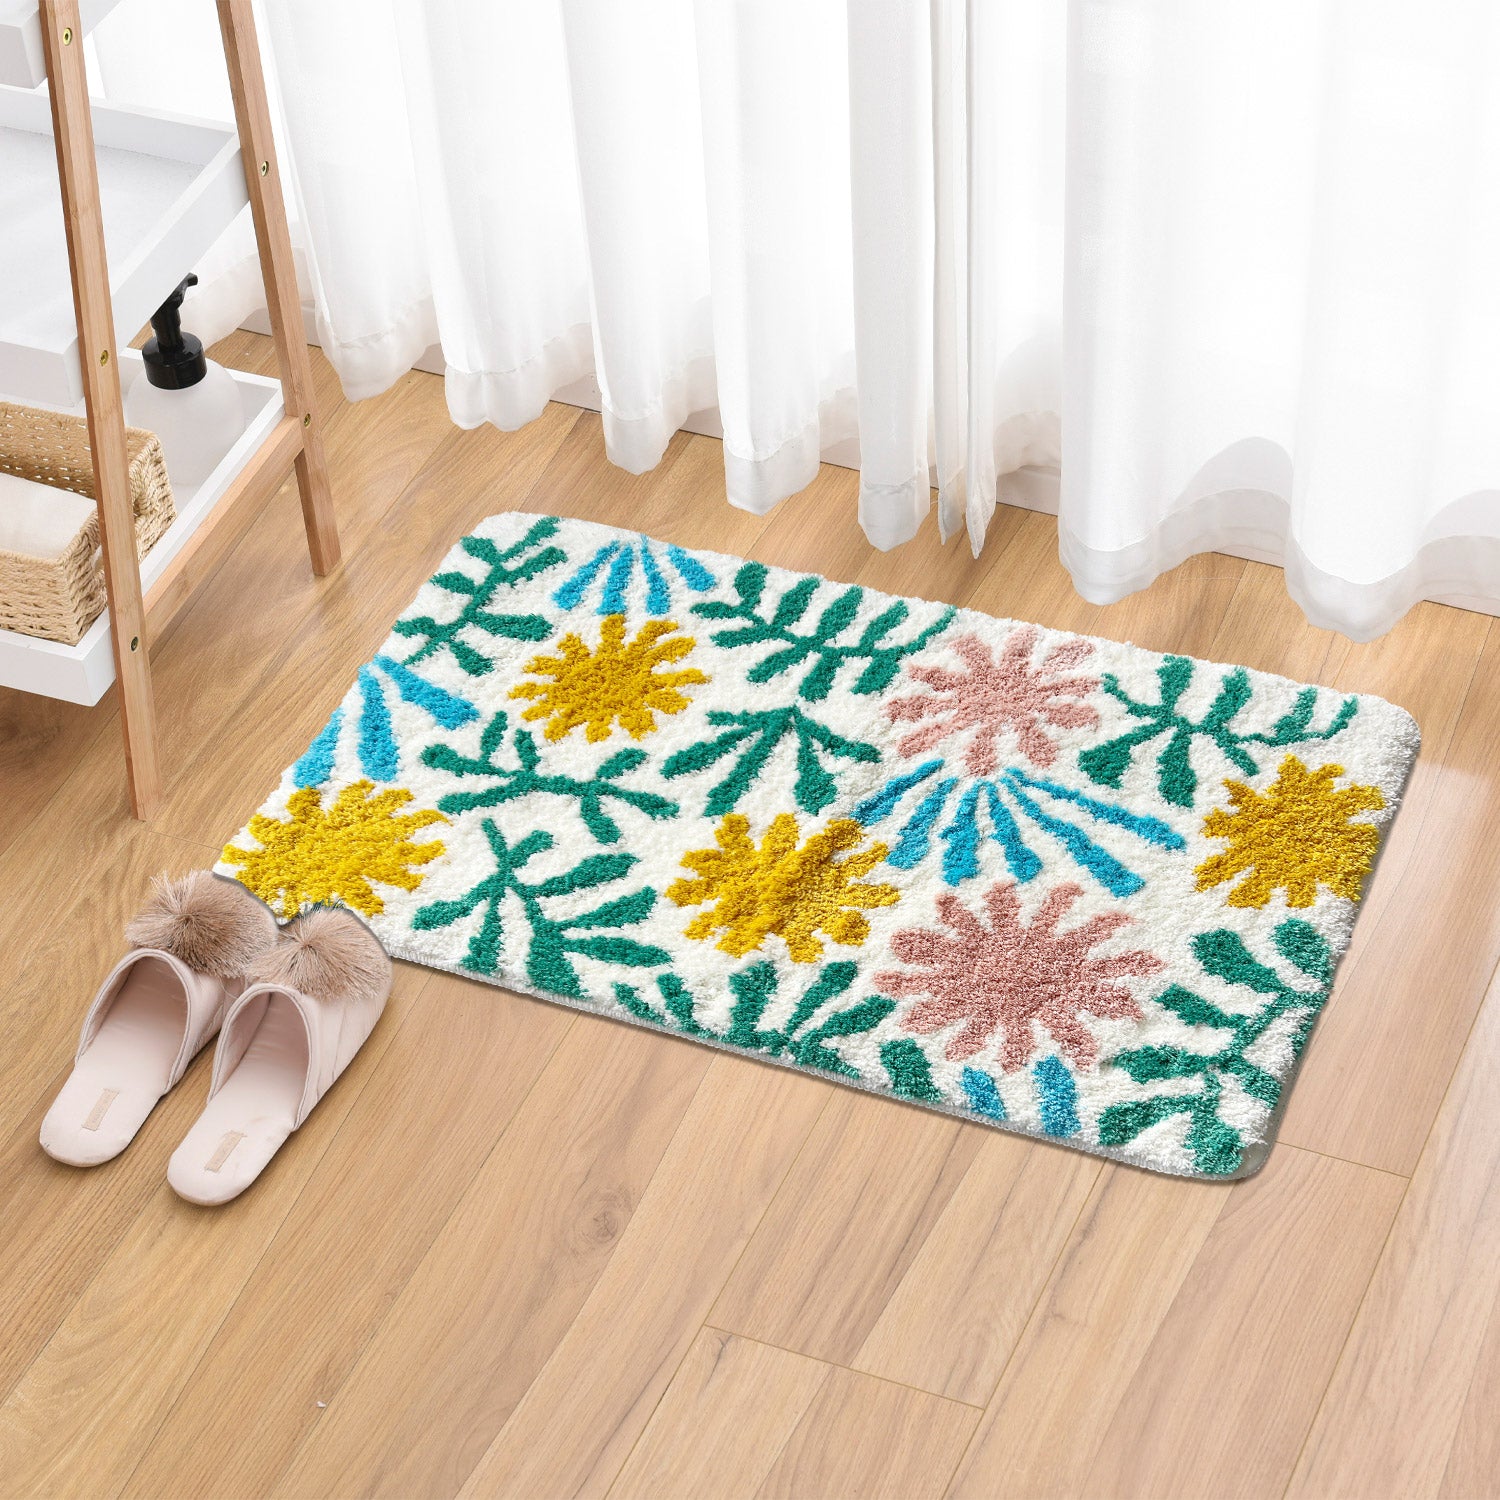 Feblilac Orange Pink Flowers and Green Leaves Tufted Bath Mat